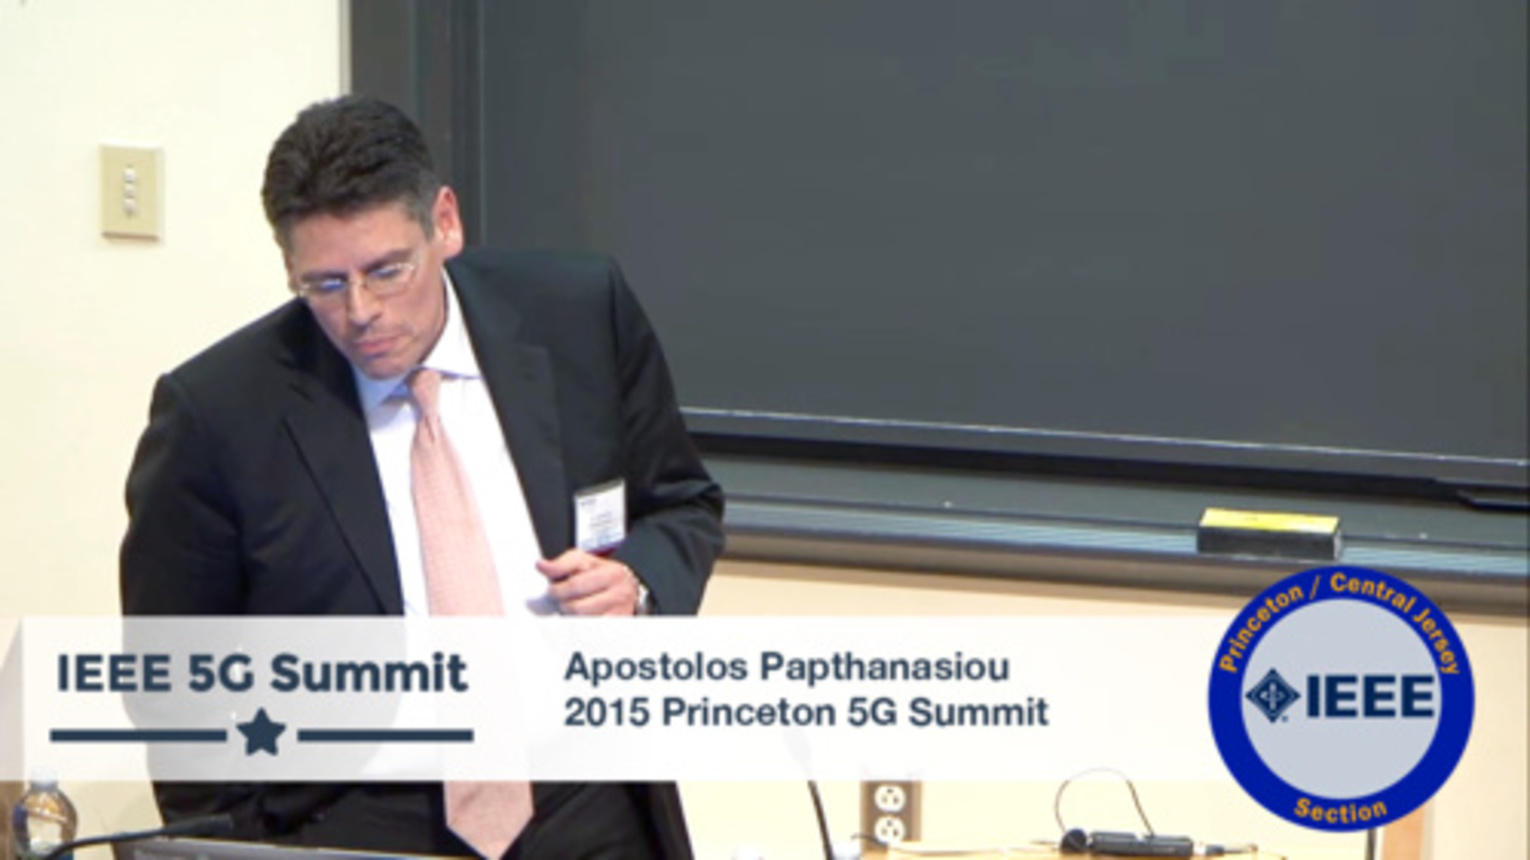 Apostolos Papthanasiou Keynote - Advancing and Connecting the Mobile World